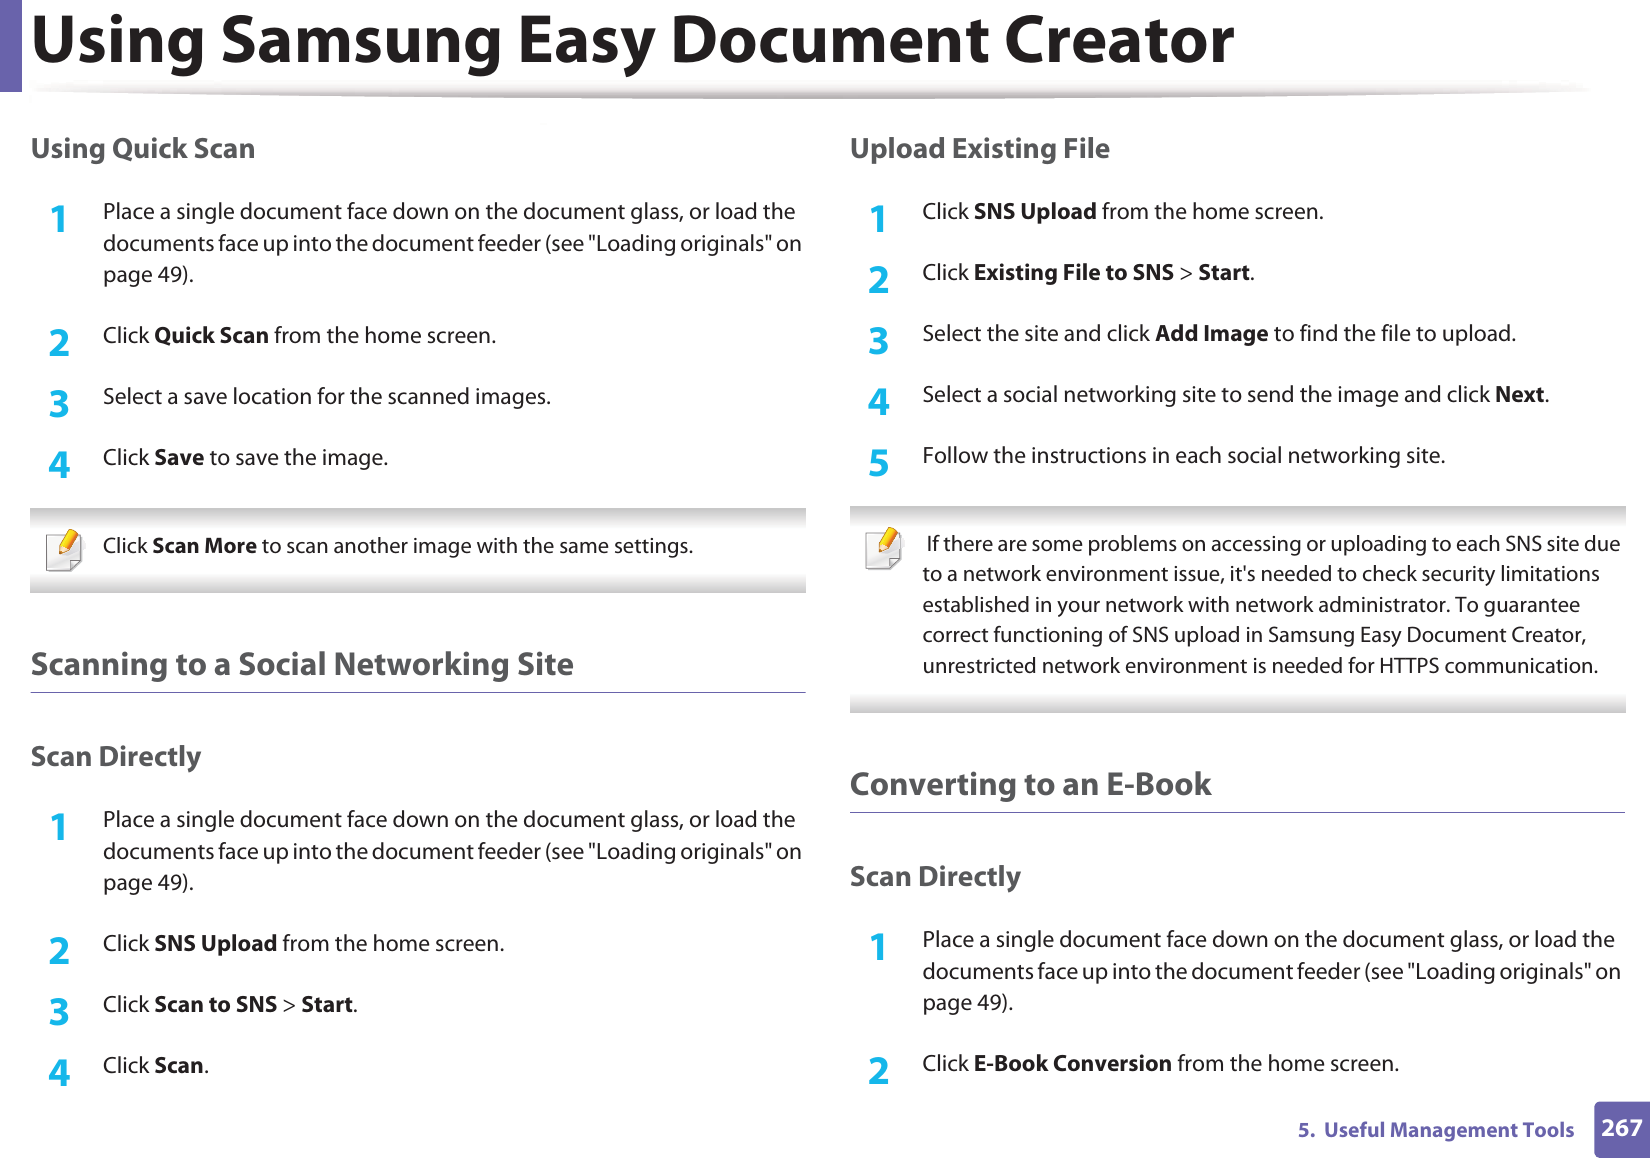 Using Samsung Easy Document Creator2675.  Useful Management ToolsUsing Quick Scan1Place a single document face down on the document glass, or load the documents face up into the document feeder (see &quot;Loading originals&quot; on page 49).2  Click Quick Scan from the home screen.3  Select a save location for the scanned images.4  Click Save to save the image. Click Scan More to scan another image with the same settings. Scanning to a Social Networking SiteScan Directly1Place a single document face down on the document glass, or load the documents face up into the document feeder (see &quot;Loading originals&quot; on page 49).2  Click SNS Upload from the home screen.3  Click Scan to SNS &gt; Start.4  Click Scan.Upload Existing File1Click SNS Upload from the home screen.2  Click Existing File to SNS &gt; Start.3  Select the site and click Add Image to find the file to upload.4  Select a social networking site to send the image and click Next. 5  Follow the instructions in each social networking site.  If there are some problems on accessing or uploading to each SNS site due to a network environment issue, it&apos;s needed to check security limitations established in your network with network administrator. To guarantee correct functioning of SNS upload in Samsung Easy Document Creator, unrestricted network environment is needed for HTTPS communication. Converting to an E-BookScan Directly1Place a single document face down on the document glass, or load the documents face up into the document feeder (see &quot;Loading originals&quot; on page 49).2  Click E-Book Conversion from the home screen.